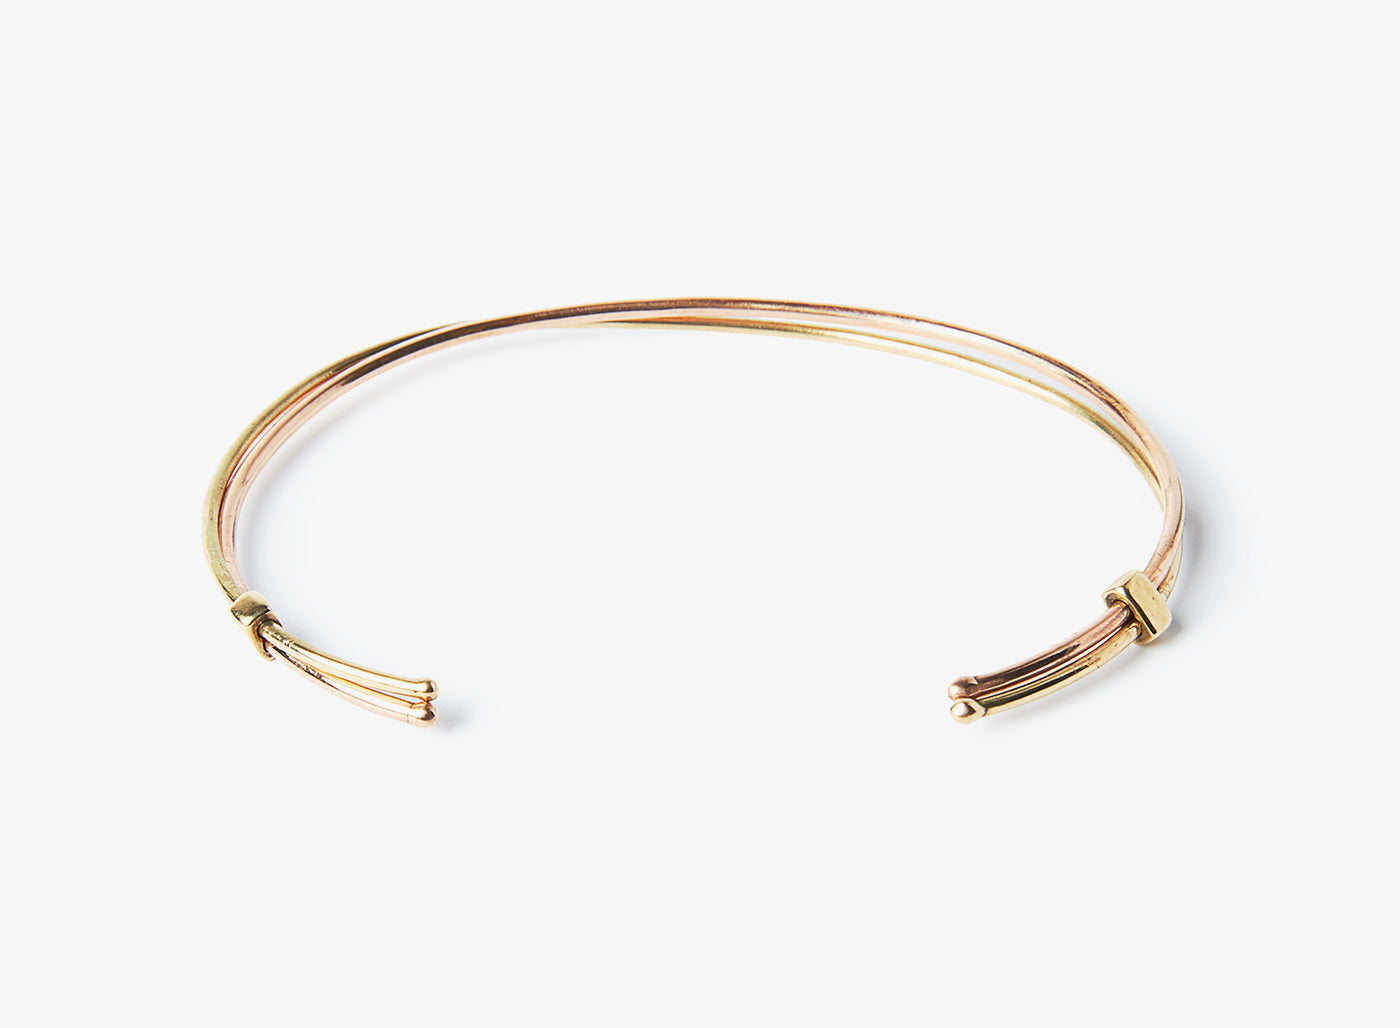 18K SOLID GOLD BRACELET 235: these 15GA, 18K yellow gold and rose gold cuffs are connected by a gold link